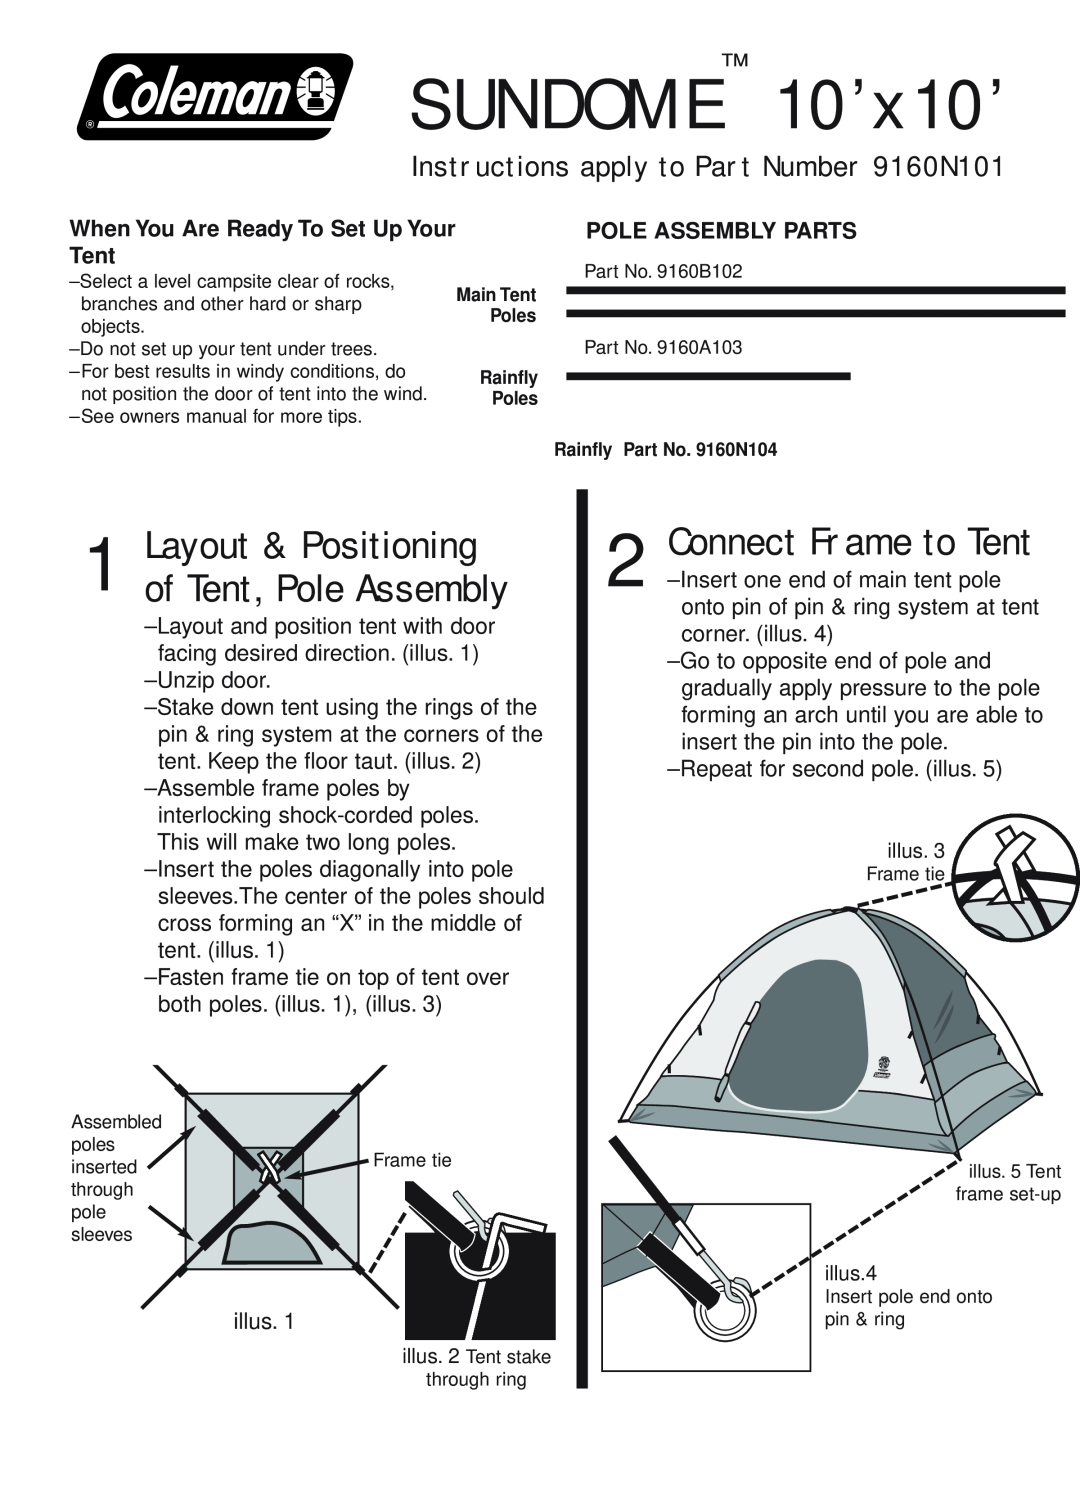 Coleman 9160N101 owner manual Layout & Positioning of Tent, Pole Assembly, When You Are Ready To Set Up Your Tent 